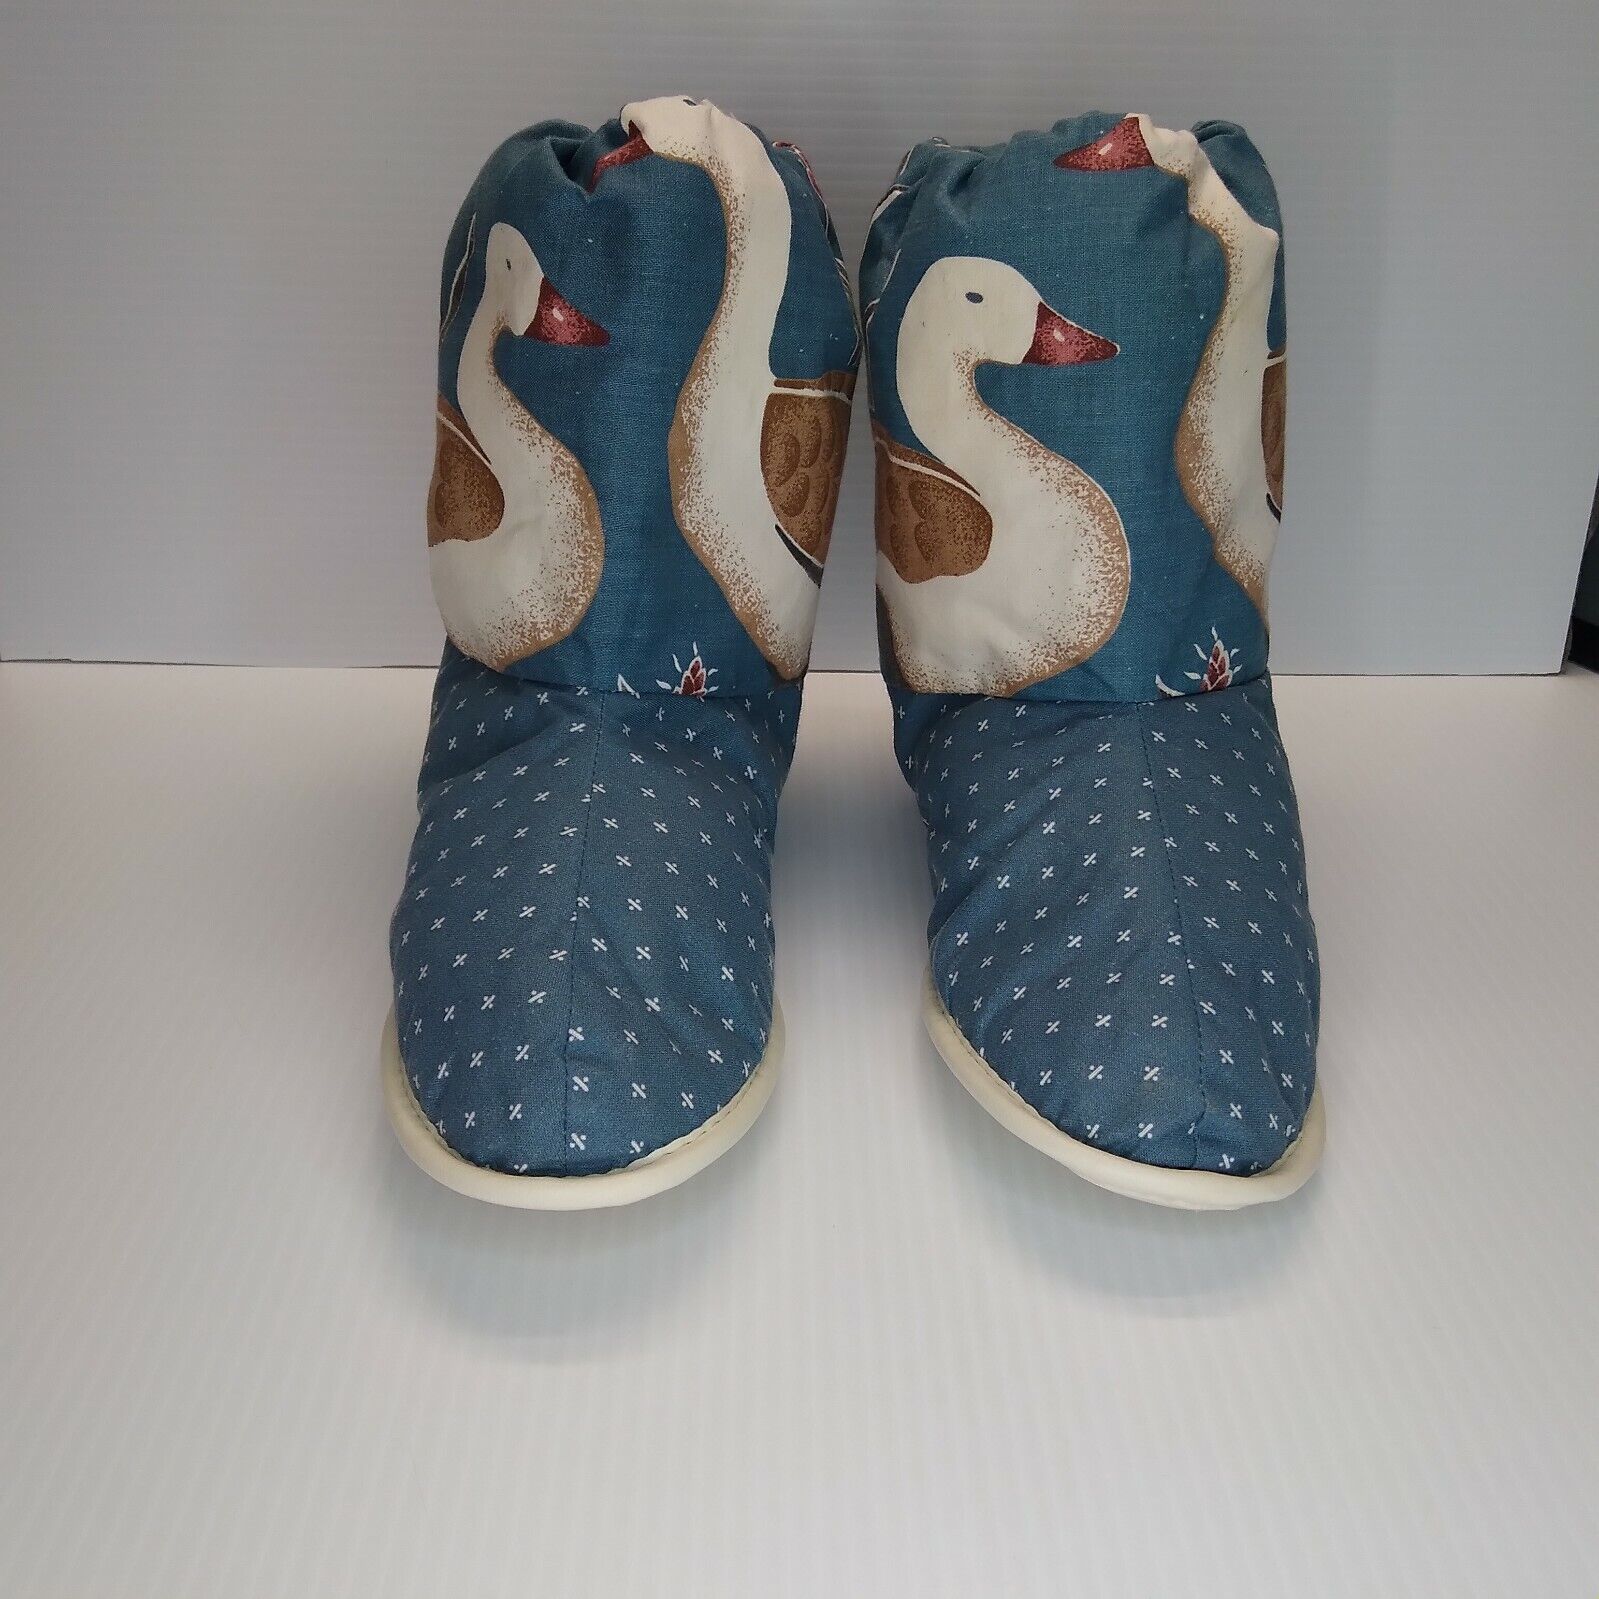 Goose Pattern Fleece Lined Boot Slippers Handcrafted in Mexico S